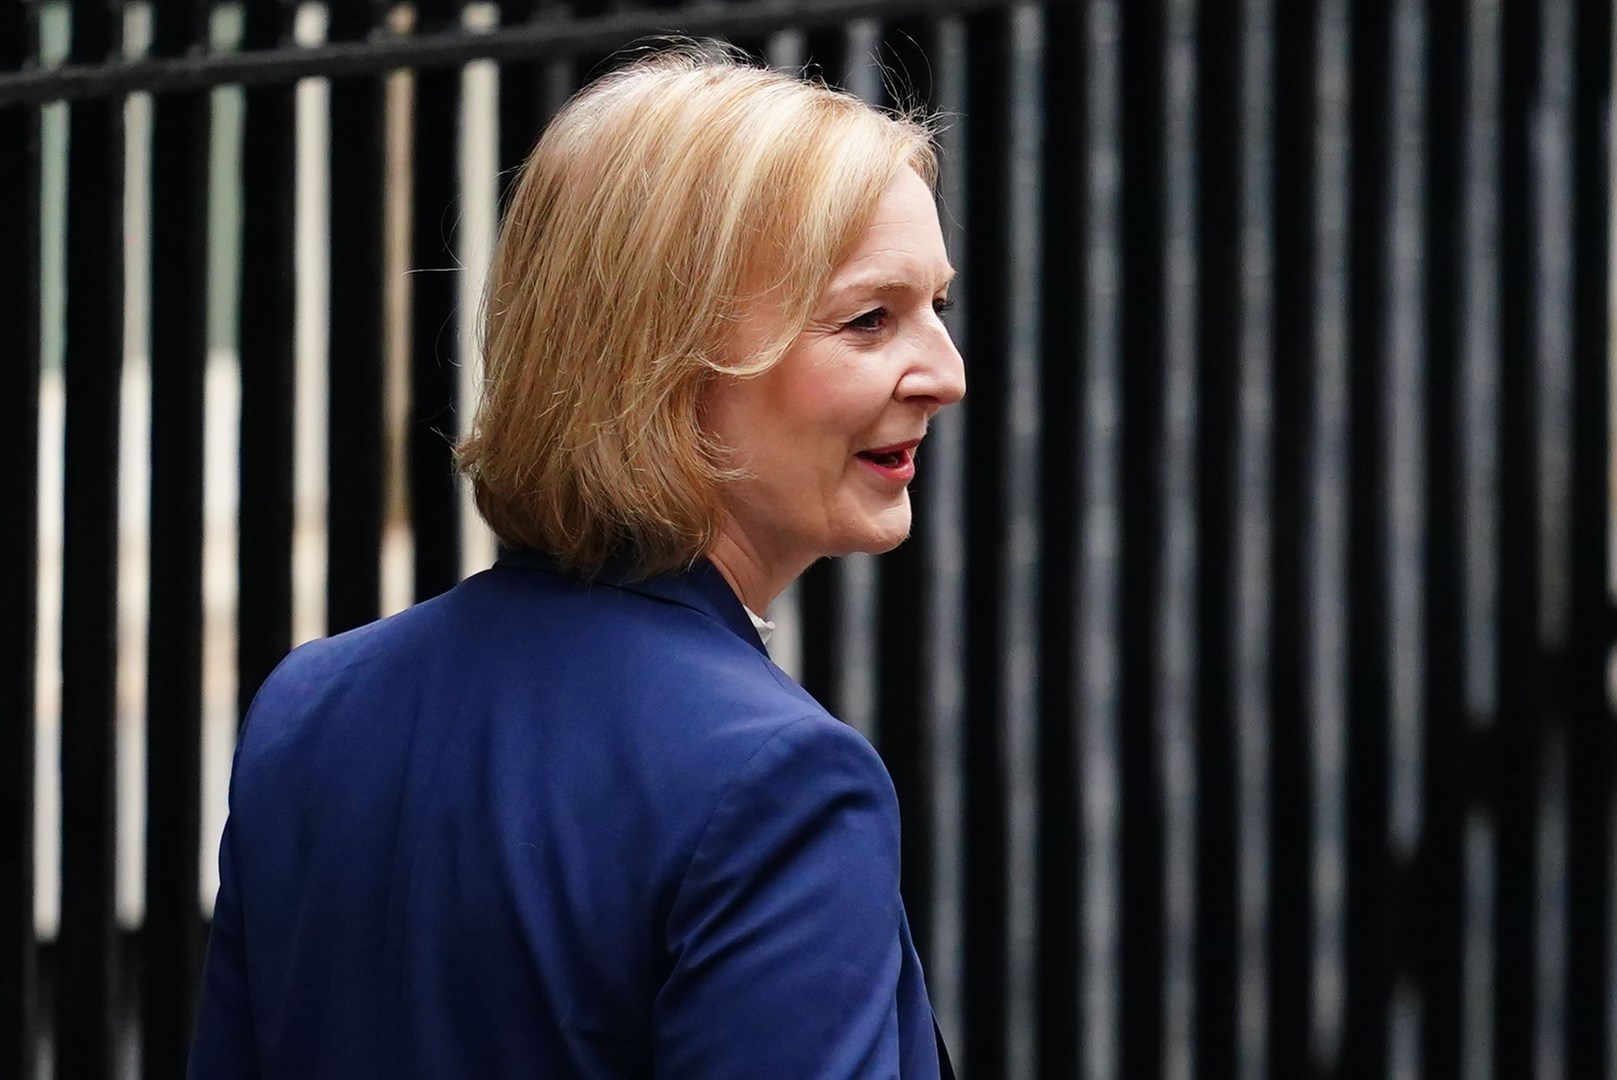 Liz Truss departs 10 Downing Street to attend her first Prime Minister’s Questions (Victoria Jones/PA)